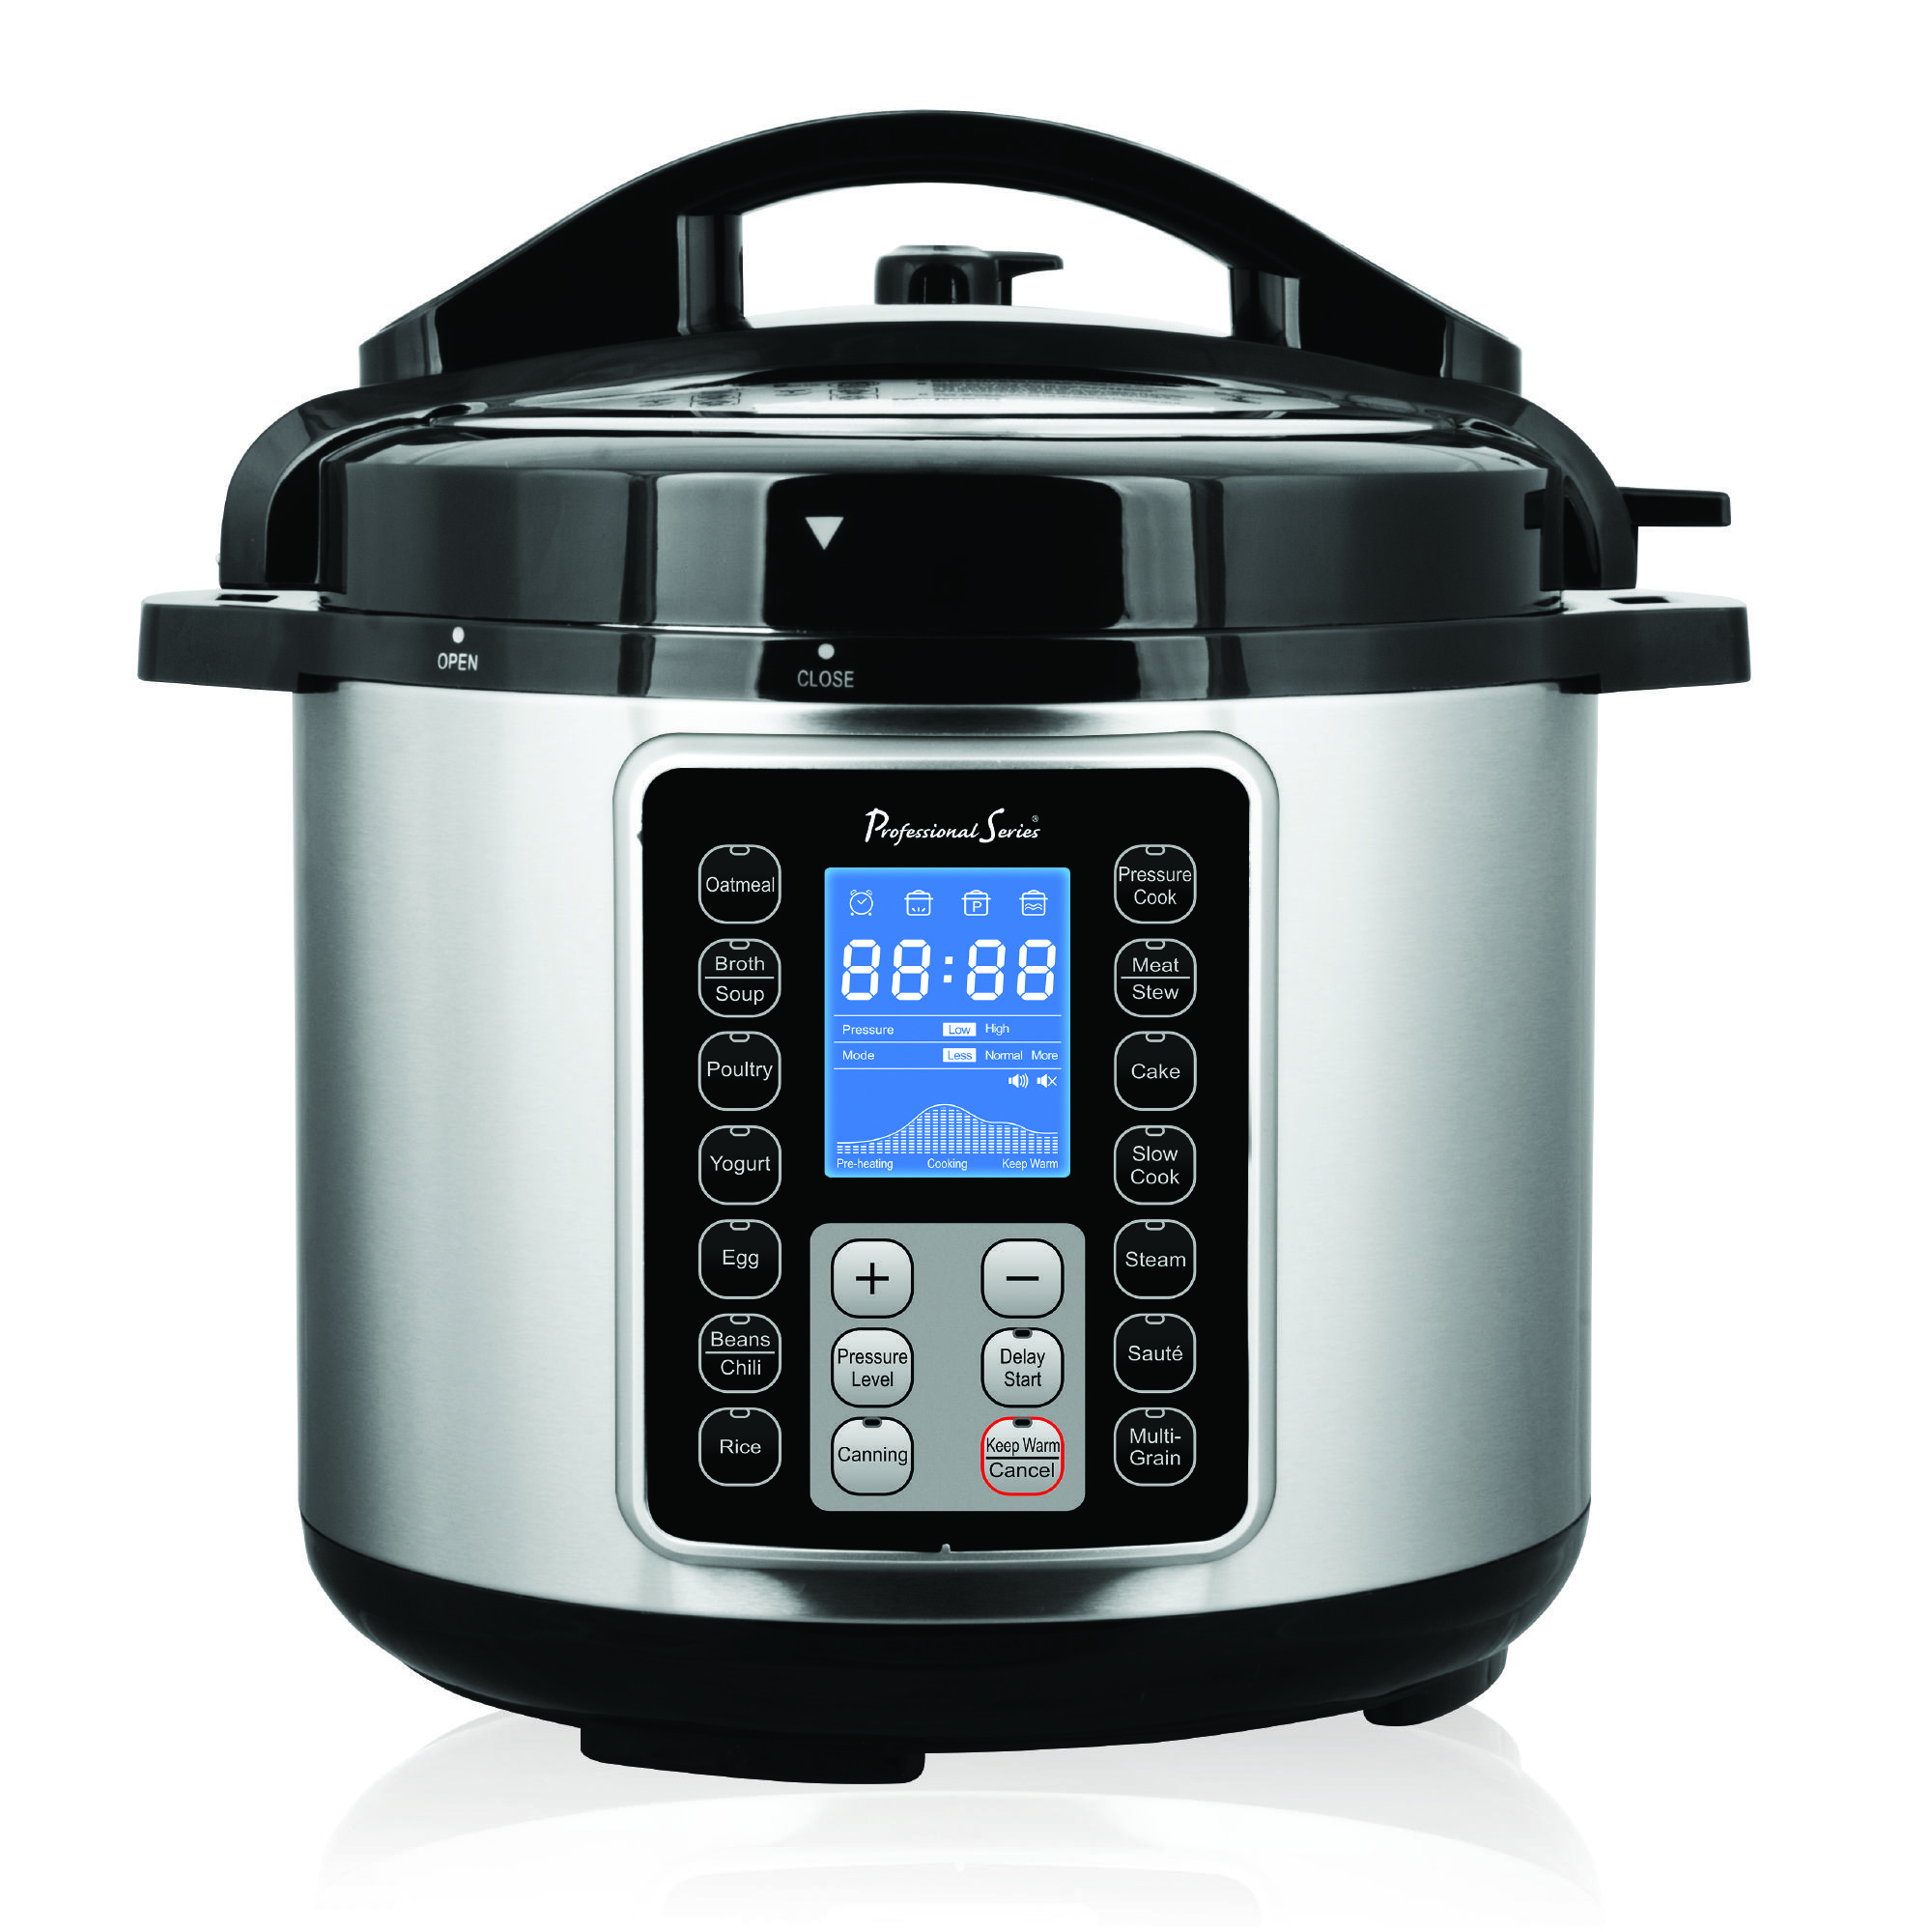 8 Qt. Pressure Cooker Stainless Steel (PS-PR338)